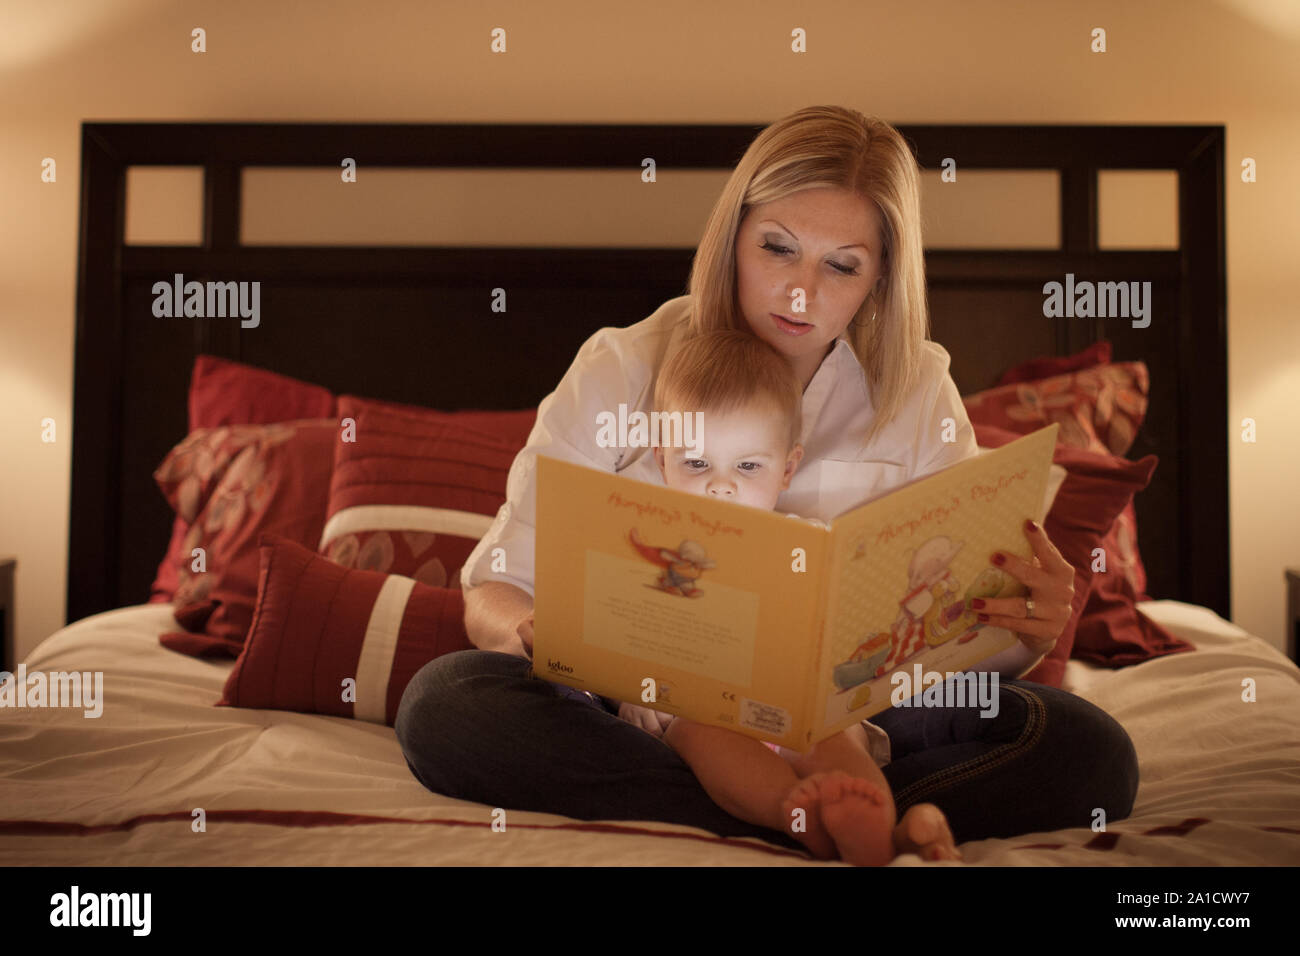 mother reading the book to her baby daughter in the bed Stock Photo